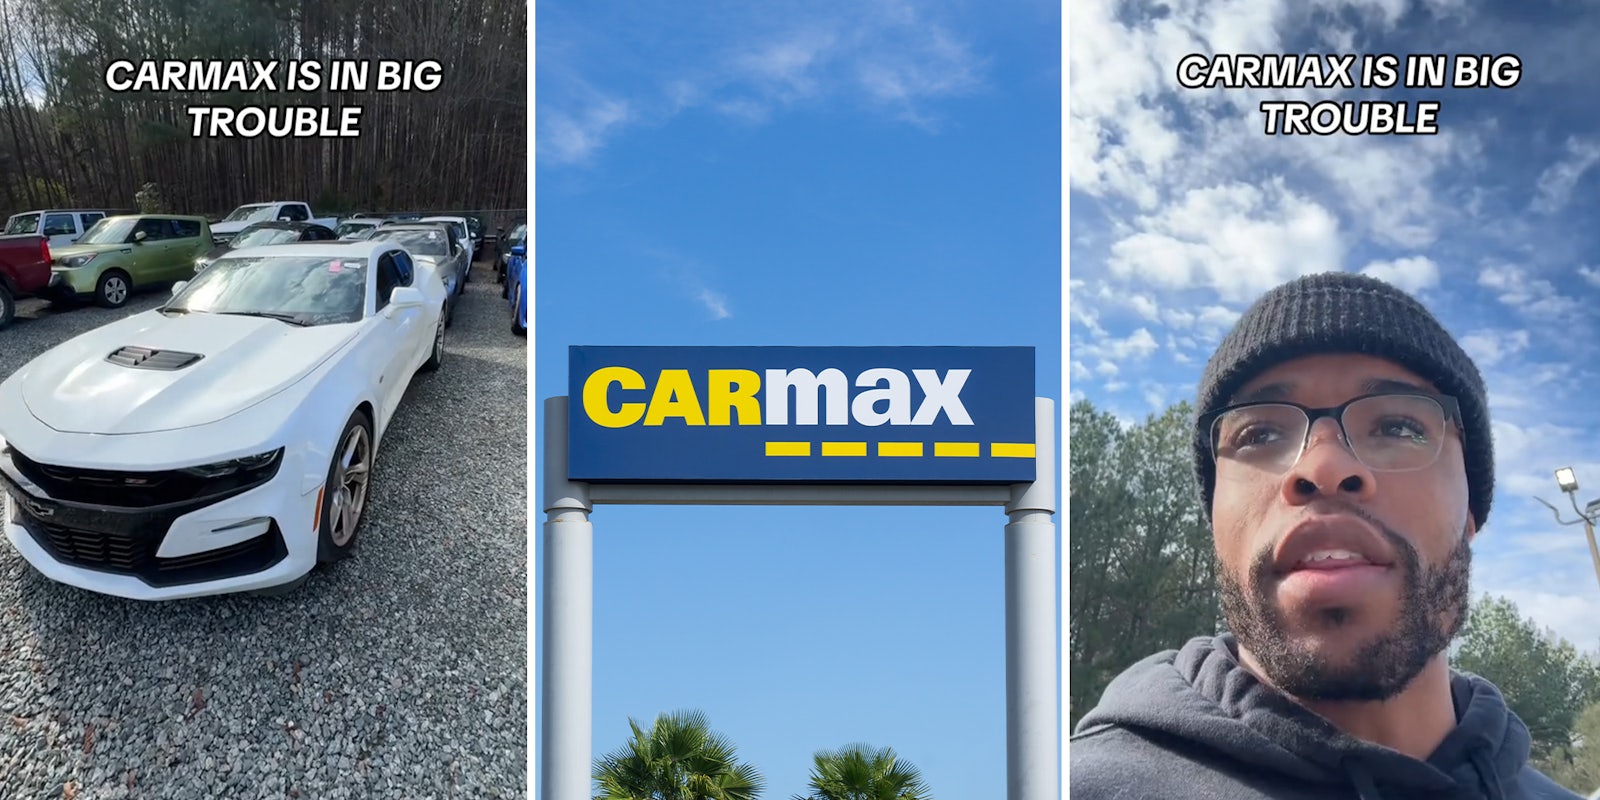 Expert says Carmax is in 'big trouble' after showing condition of repo'd cars. Viewers side with Carmax